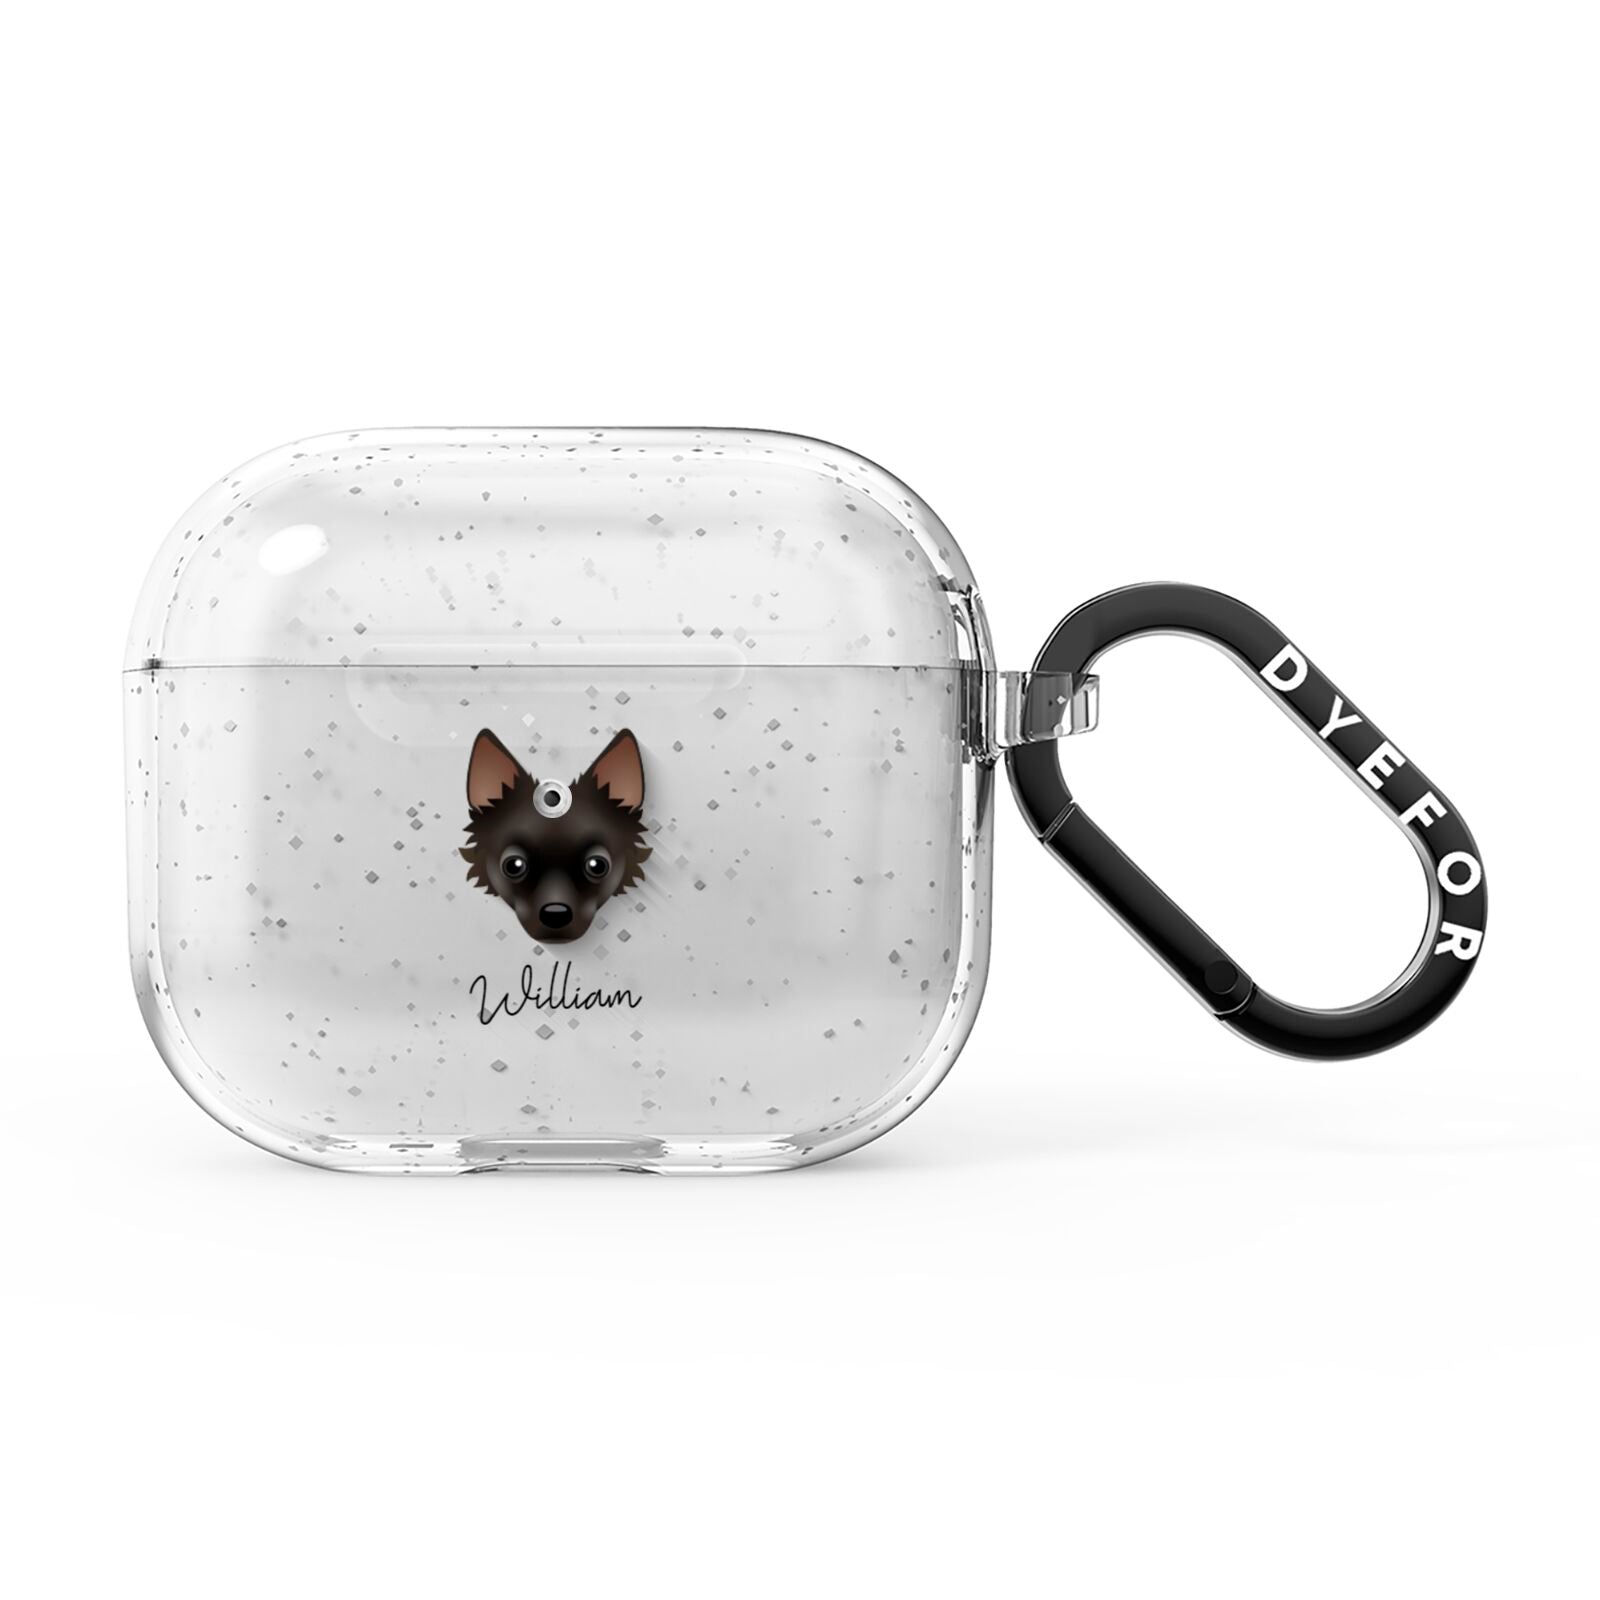 Jackahuahua Personalised AirPods Glitter Case 3rd Gen